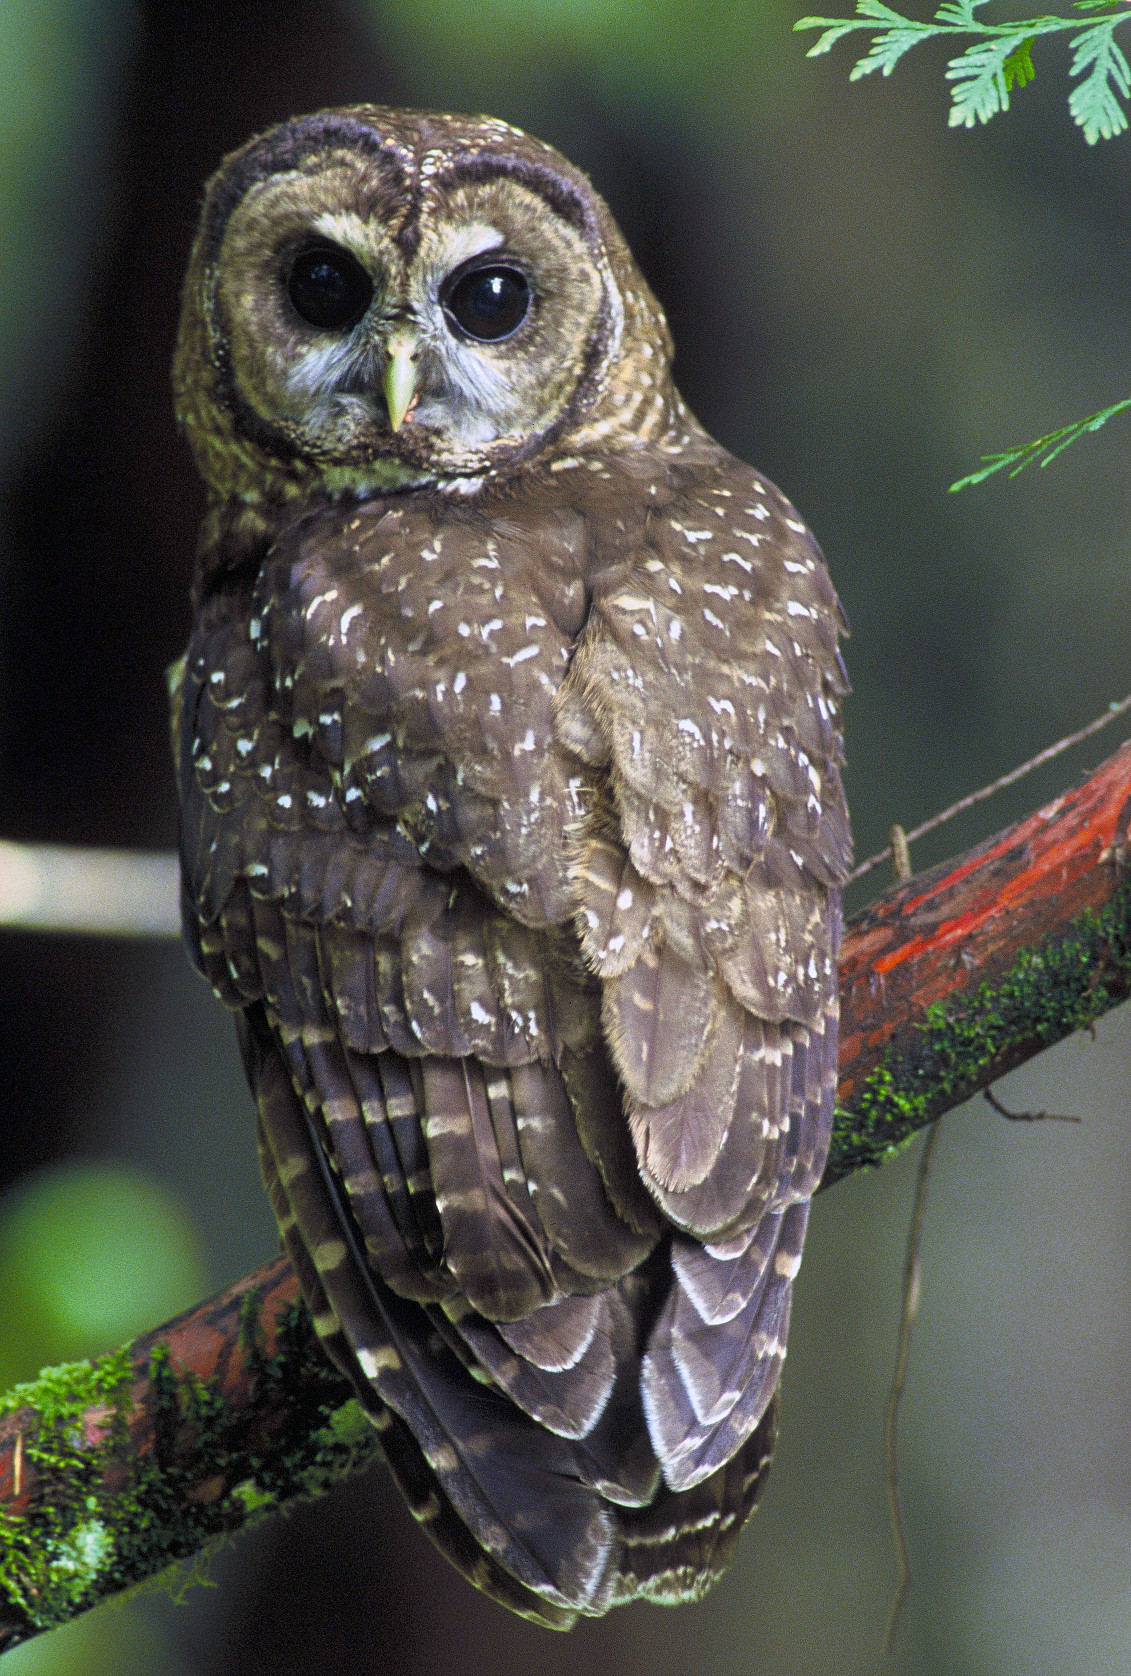 Northern spotted owl, a near threatened species whose wingspan is approximately one metre.